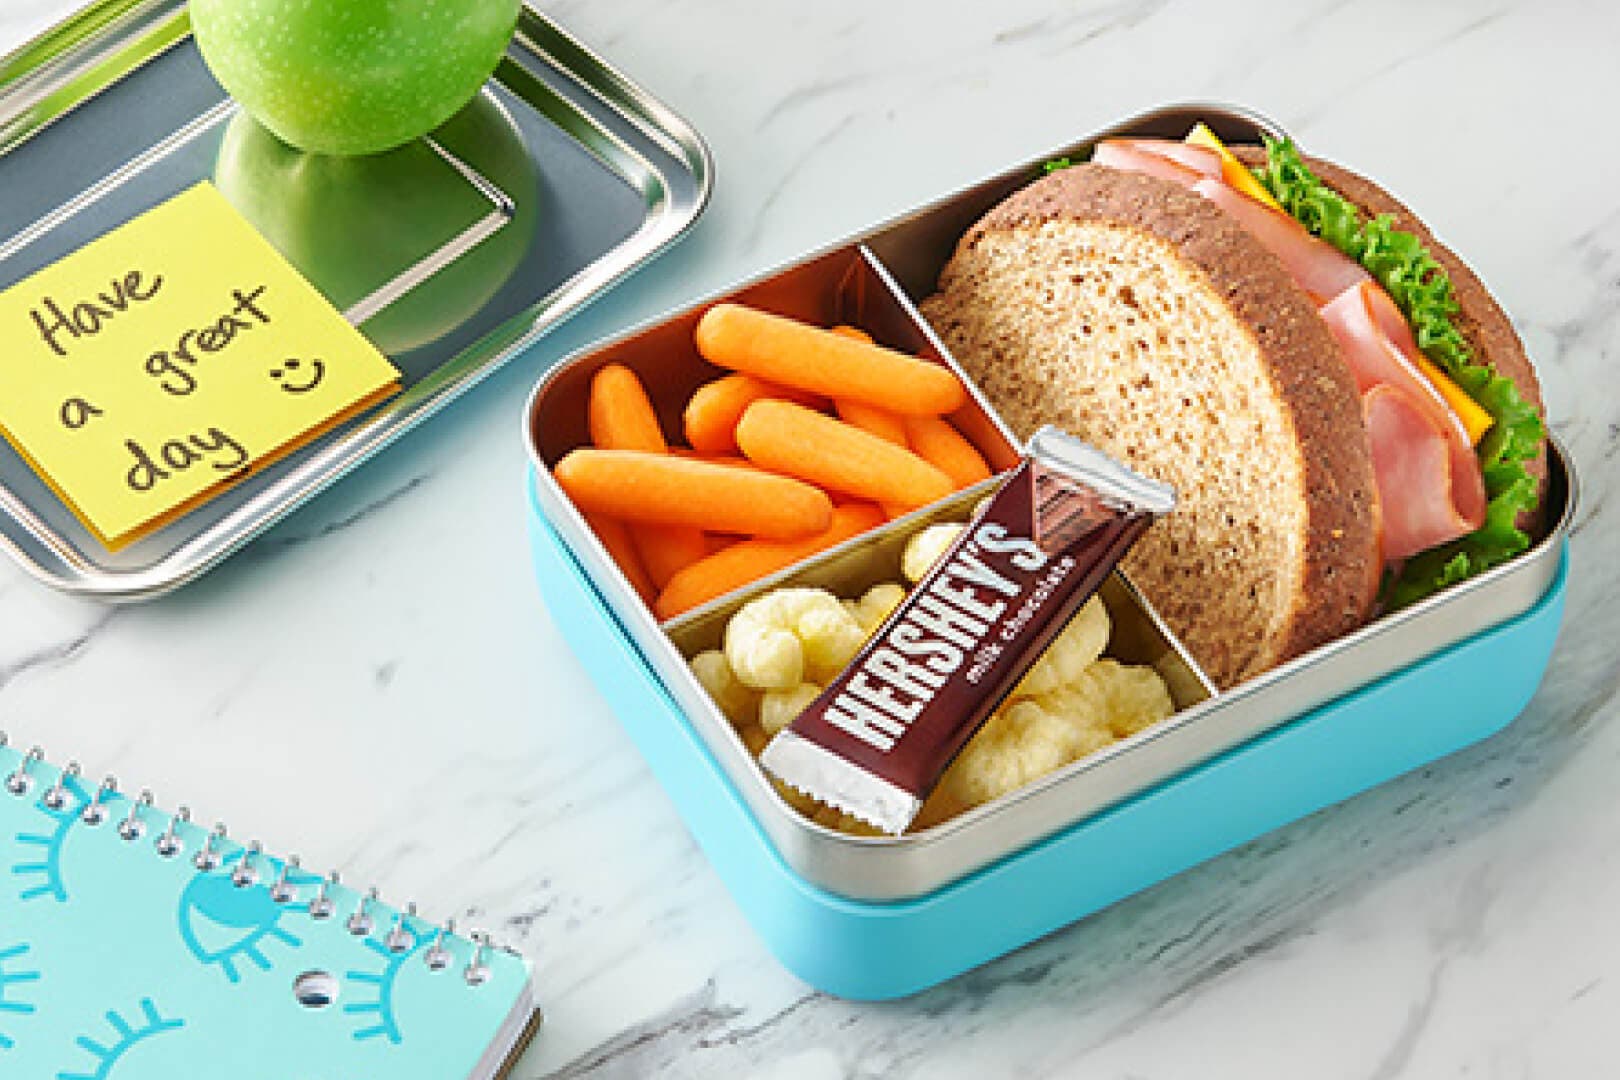 school lunchbox with hersheys snacks and chocolate candy